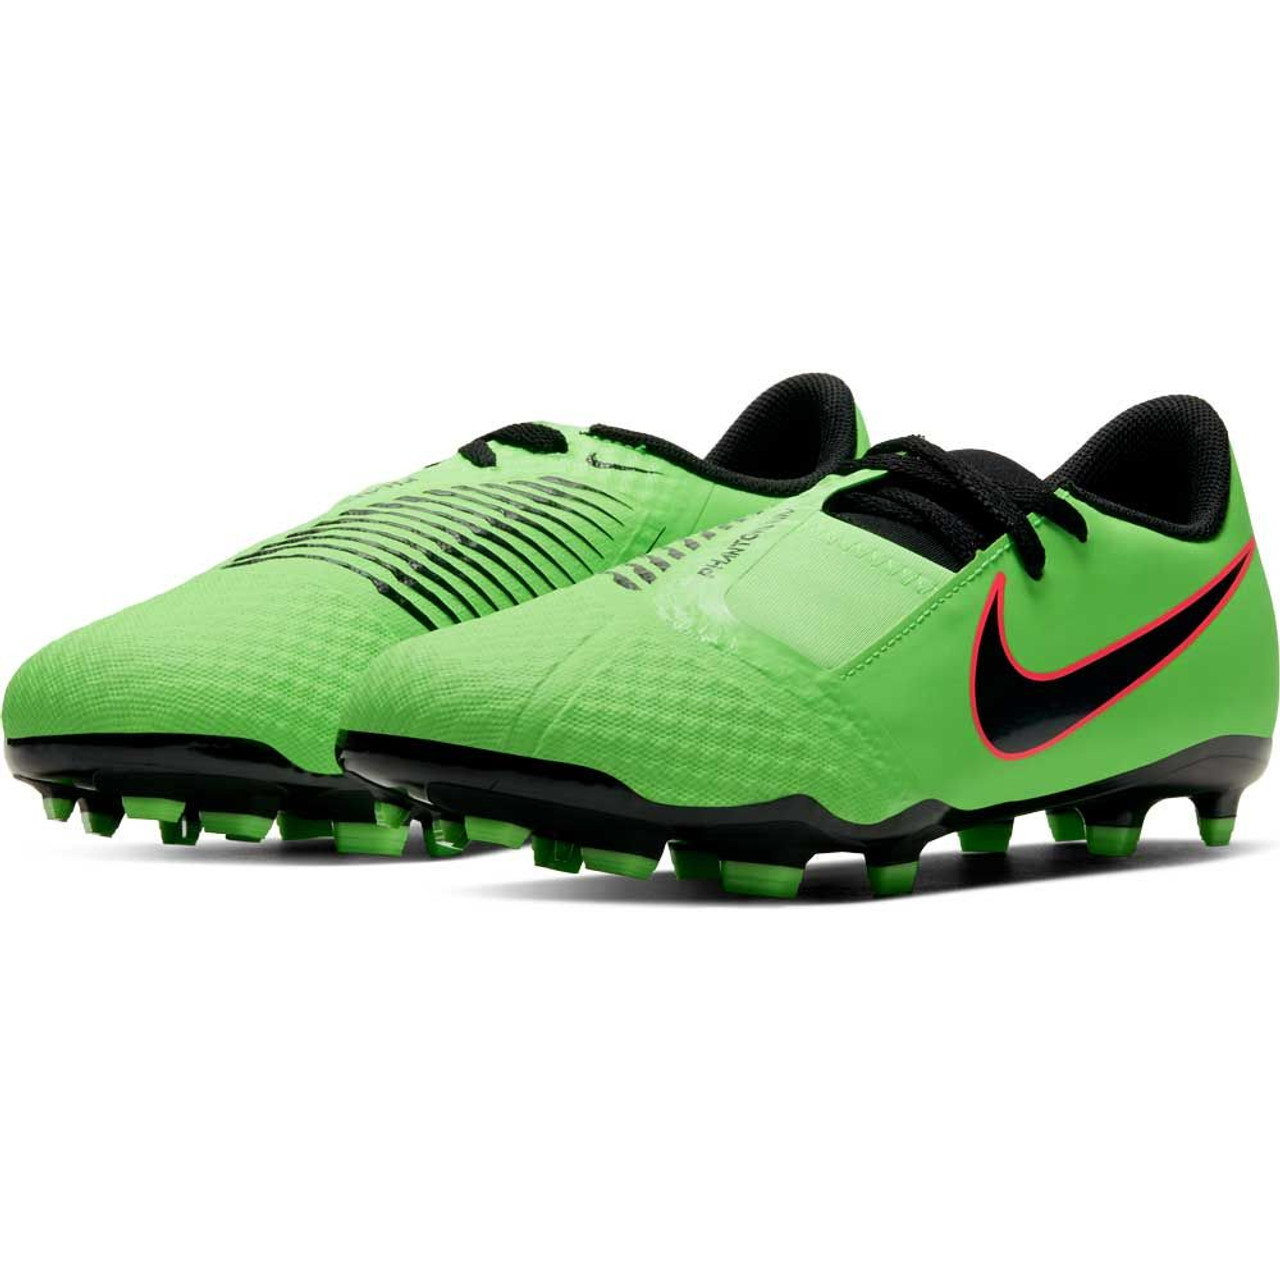 Nike Phantom Academy Firm Ground Soccer Cleats Youth Version 306/Green-Black - Chicago Soccer